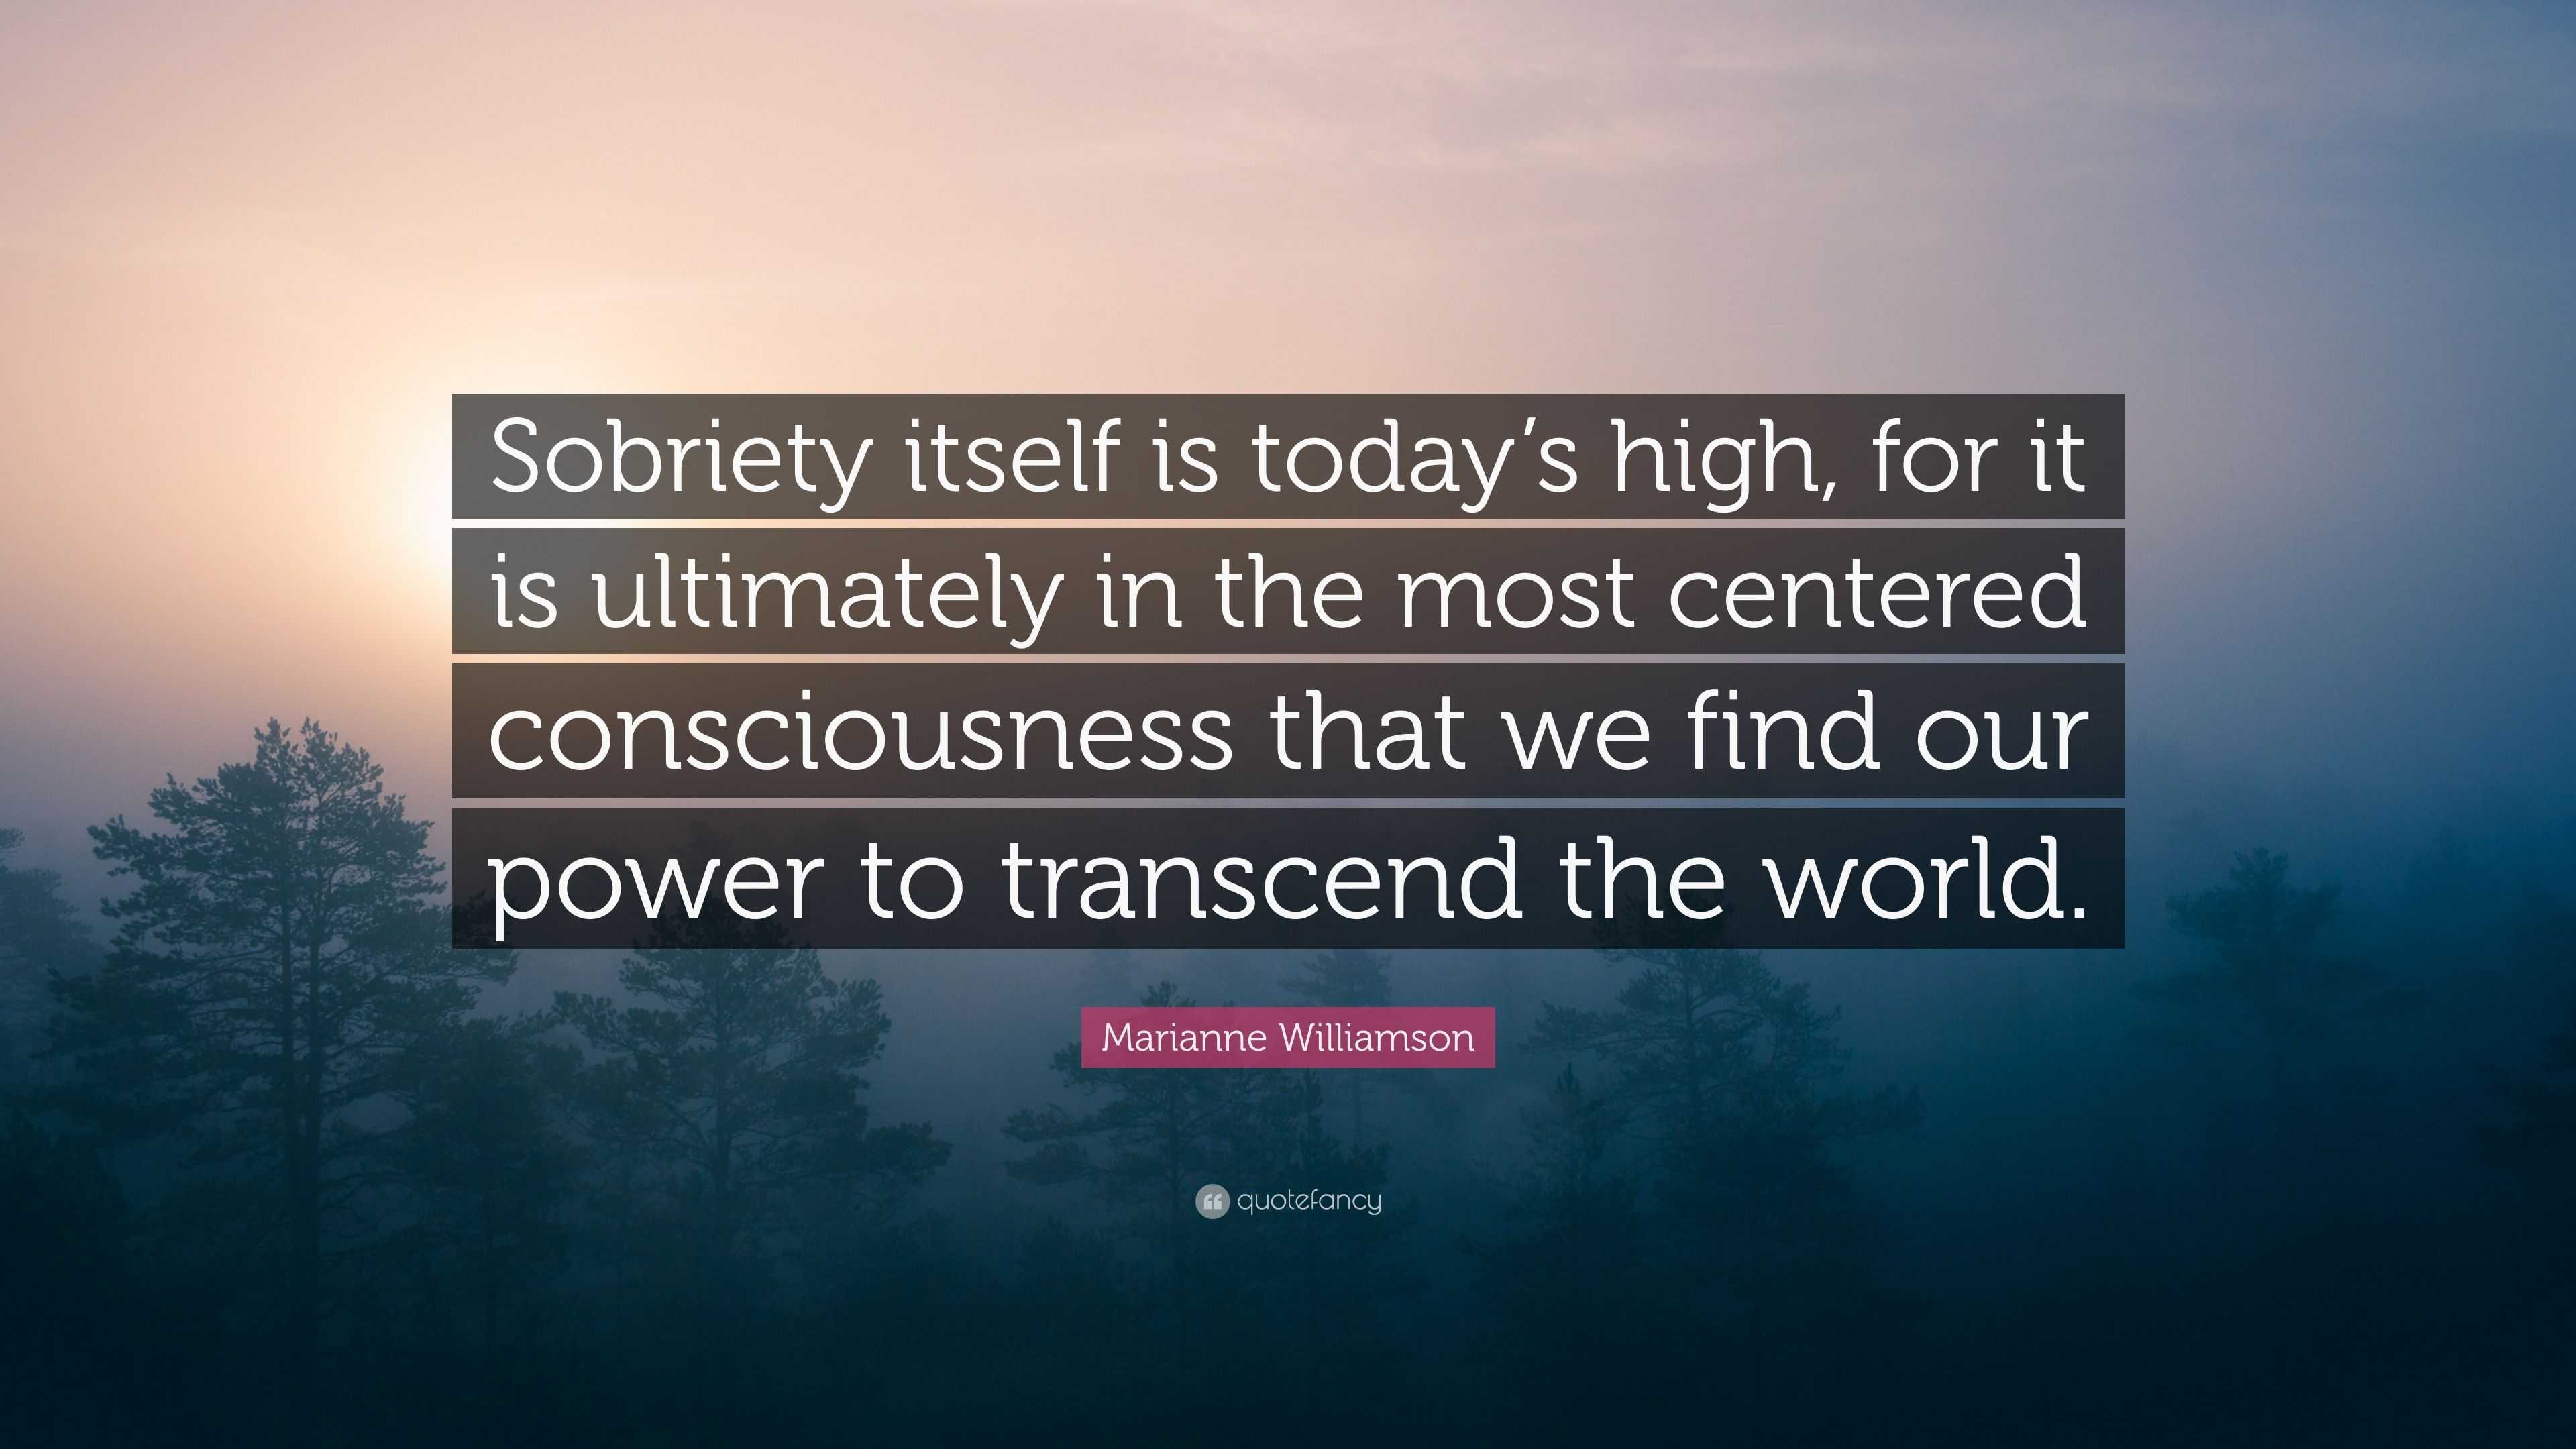 Marianne Williamson Quote: “Sobriety itself is today’s high, for it is